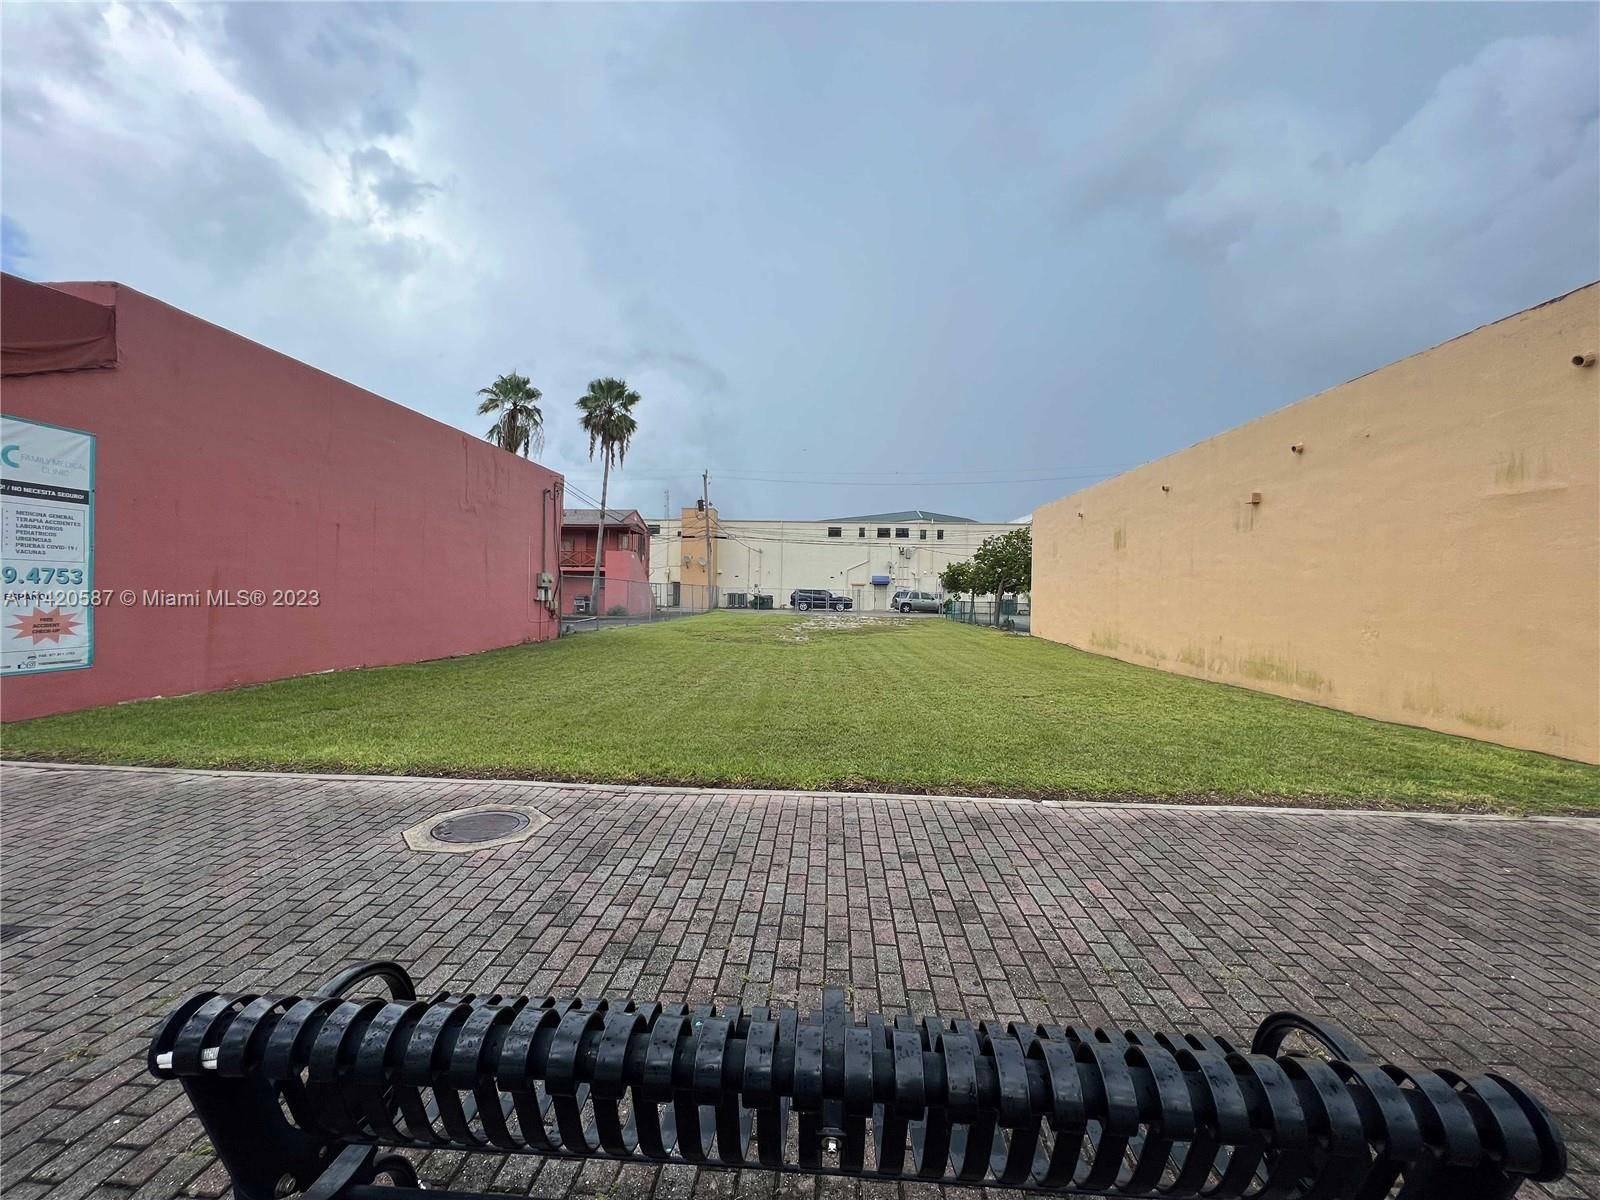 6, 750 sqft Lot in the heart of Homestead ready to be developed.